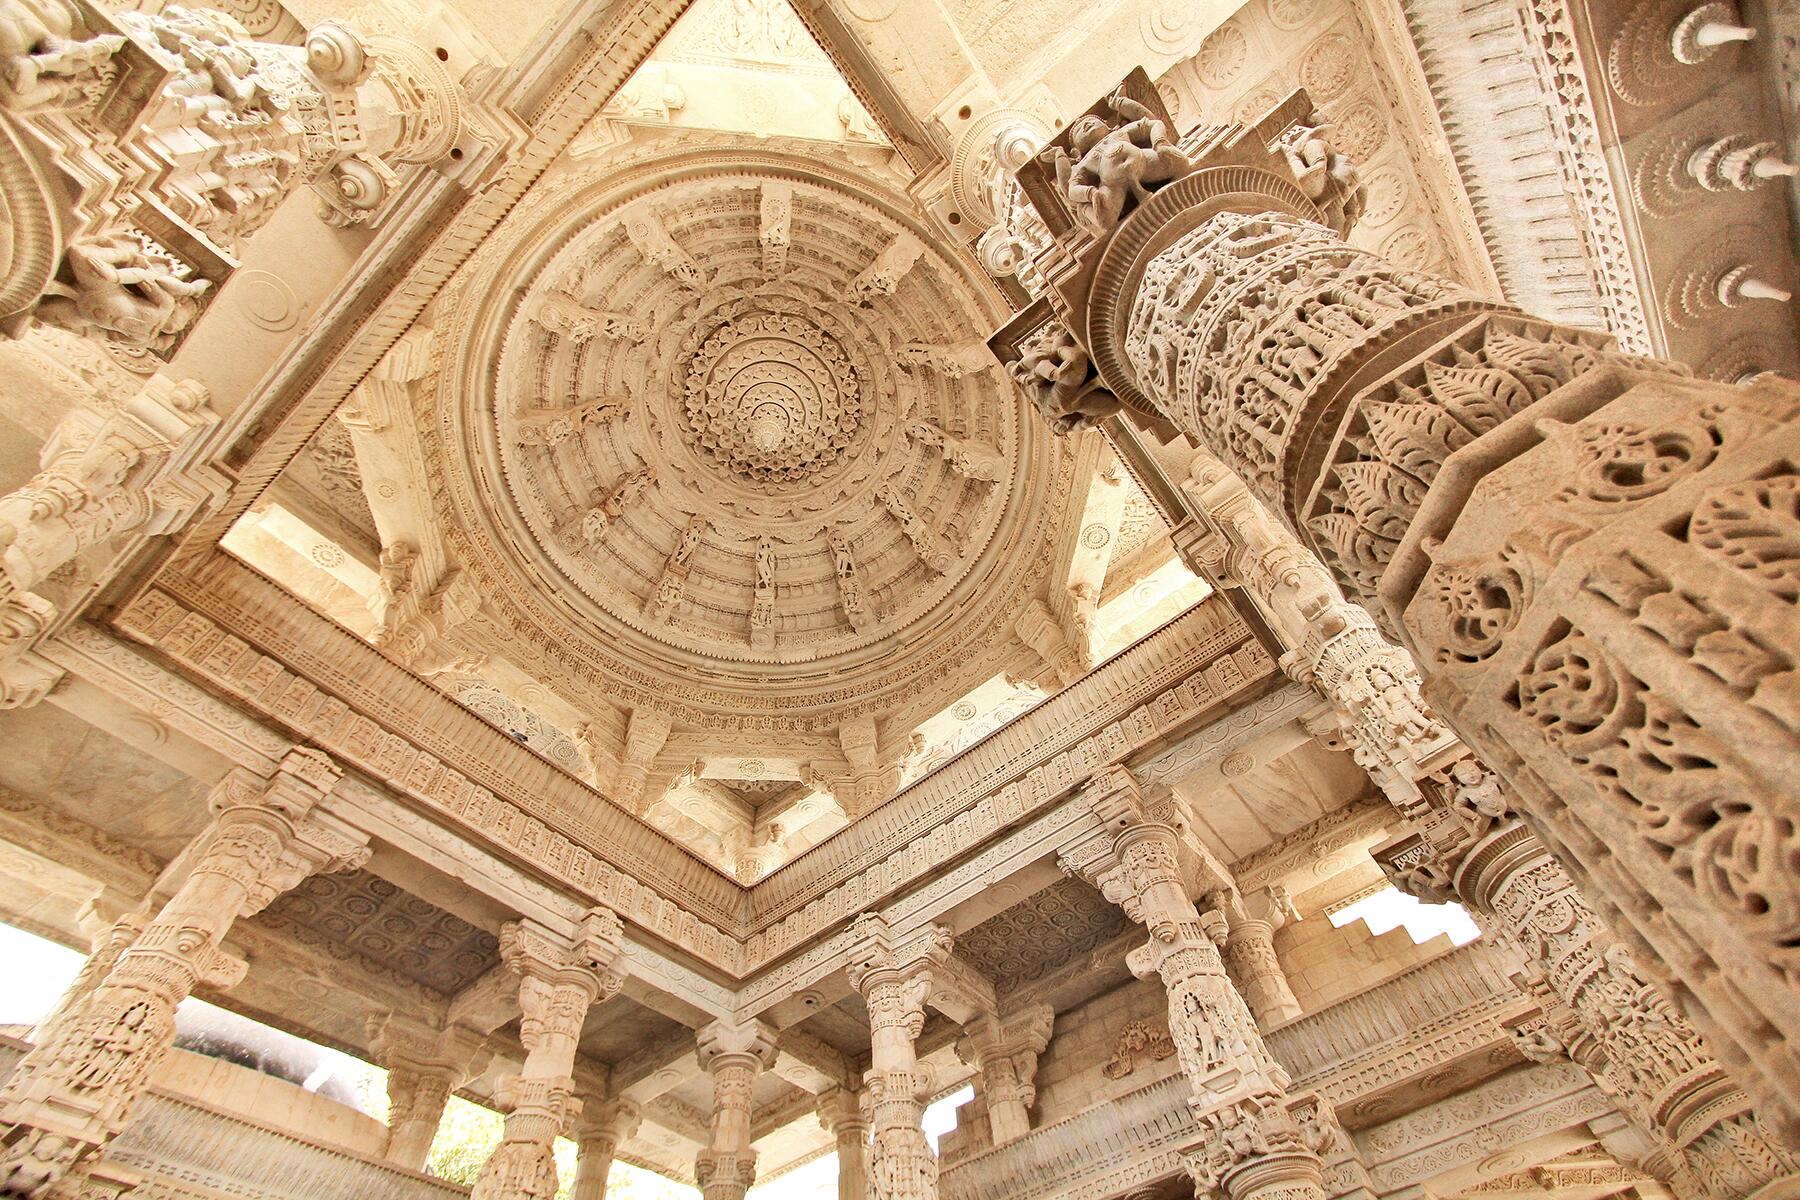 India's Famous Jain Temples Are Incredible Architectural Marvels - InDiaJainTemples  HERO Shutterstock 178008650